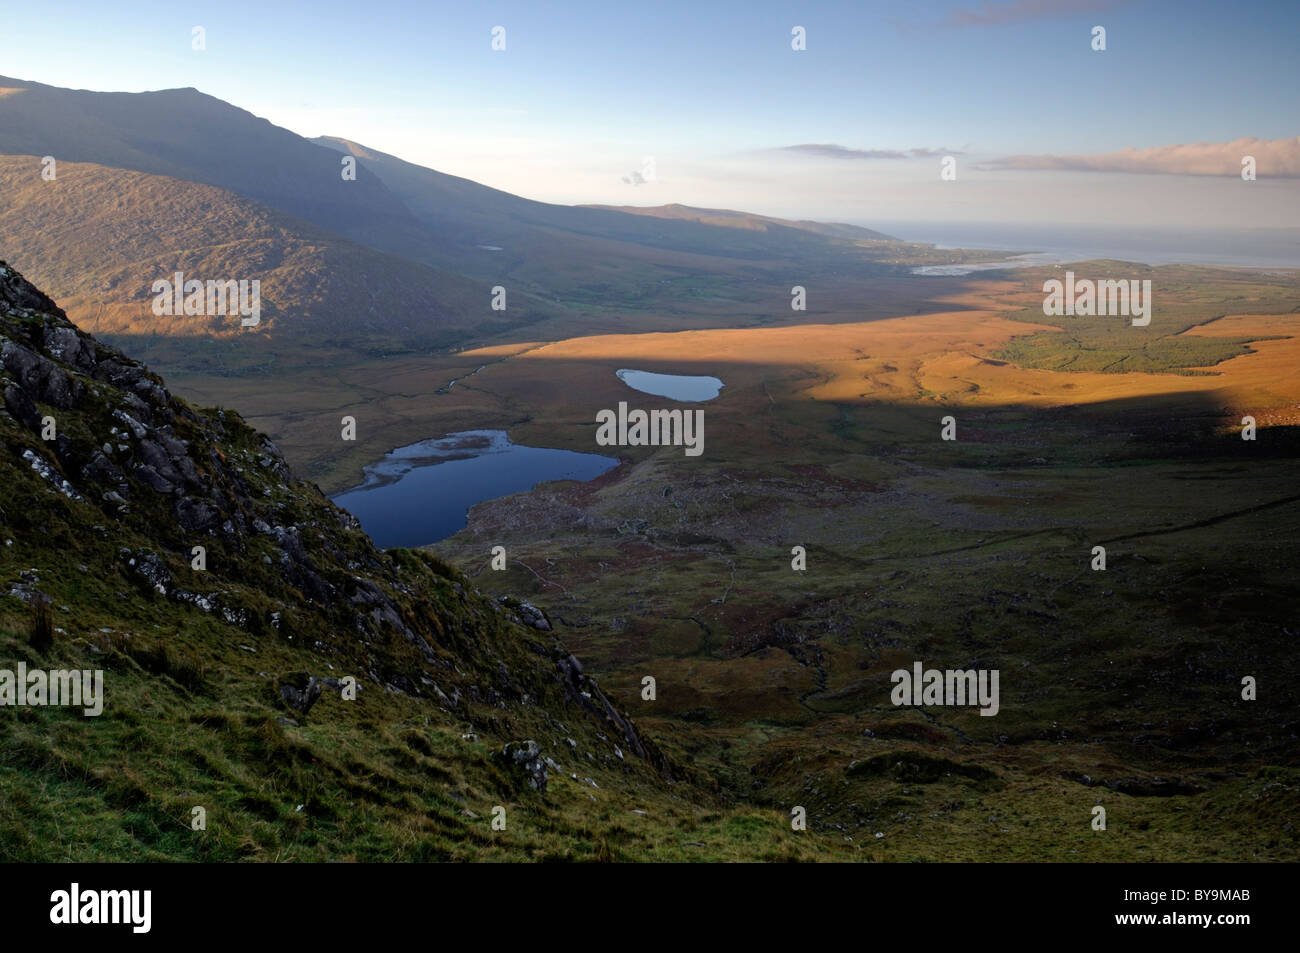 Soft light over the brandon mountains along the Conor pass near Dingle County Kerry Ireland scenic scene viewpoint Stock Photo